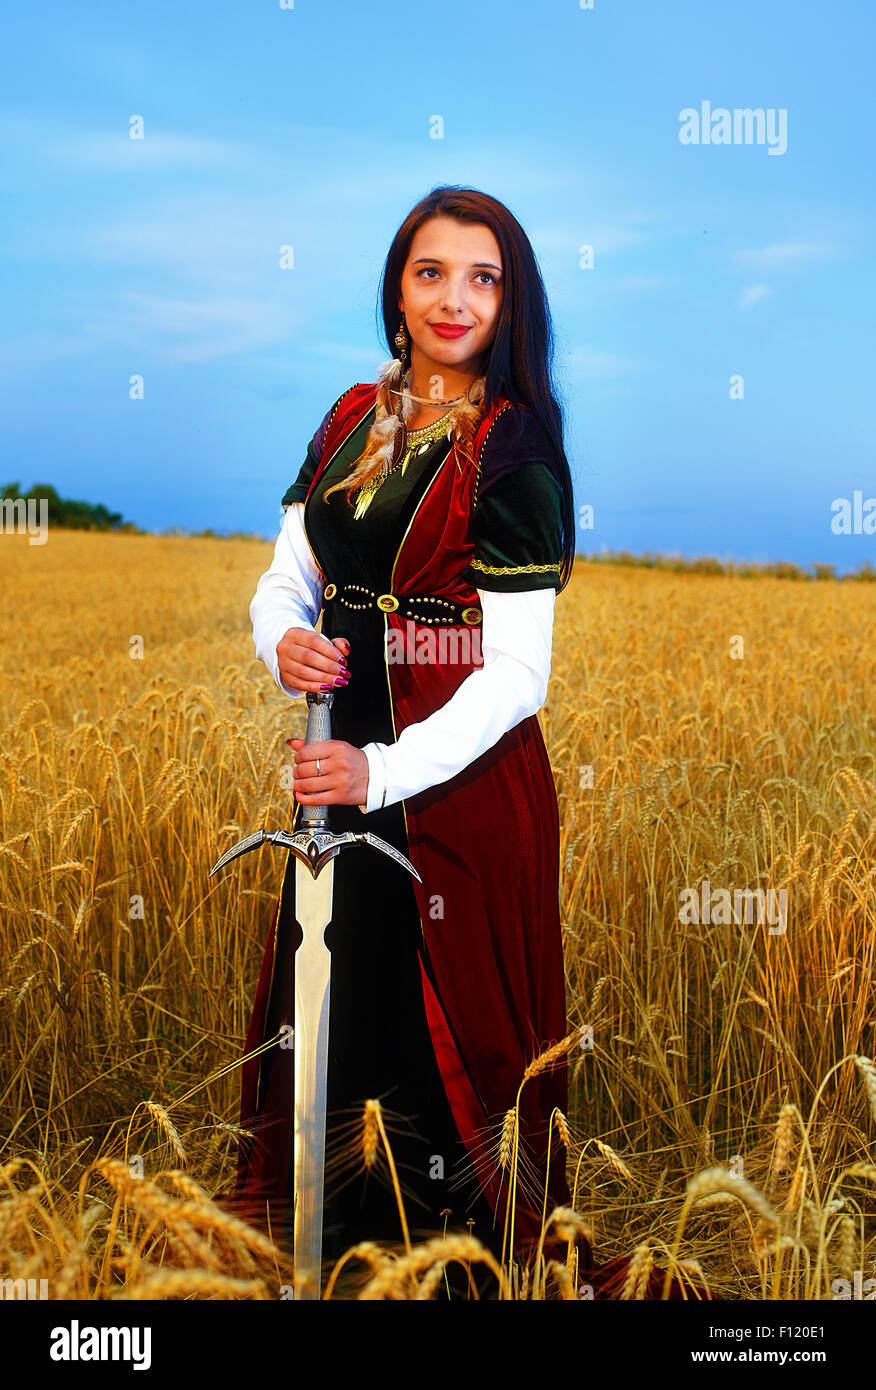 Smiling Young woman with ornamental dress and sword in hand  standing on a wheat field with sunset. Natural background.. Stock Photo